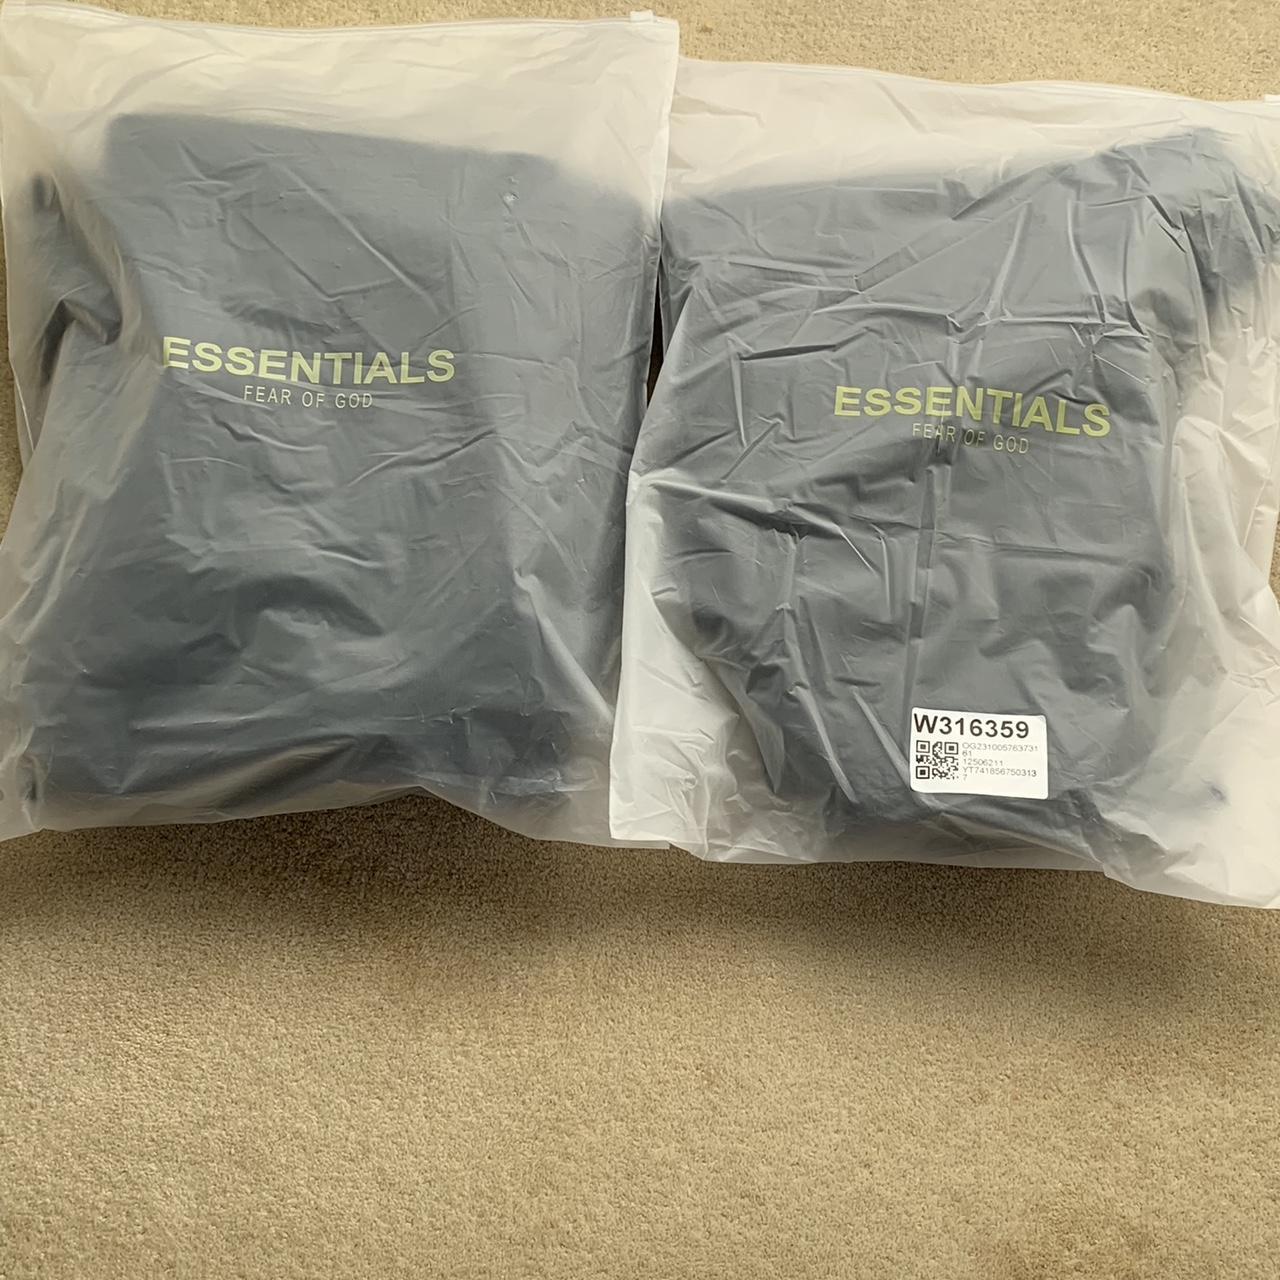 Confirm purchase before hand Item - Essentials... - Depop